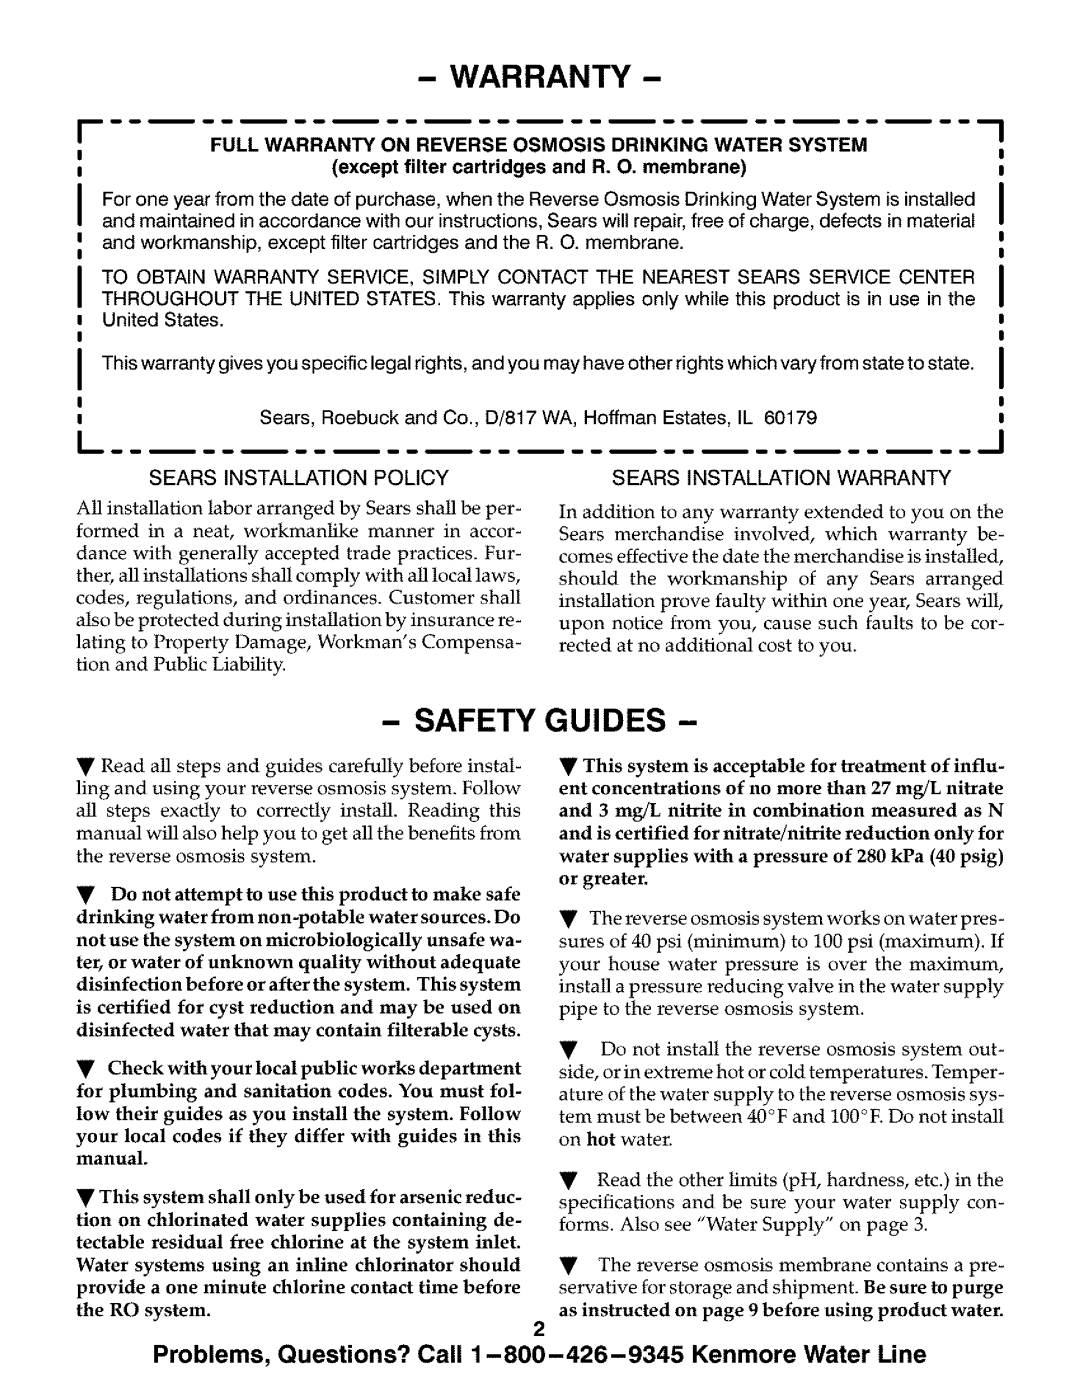 Kenmore ULTRAFILTER 500 manual Safety Guides, Sears Installation Policy, Sears Installation Warranty 